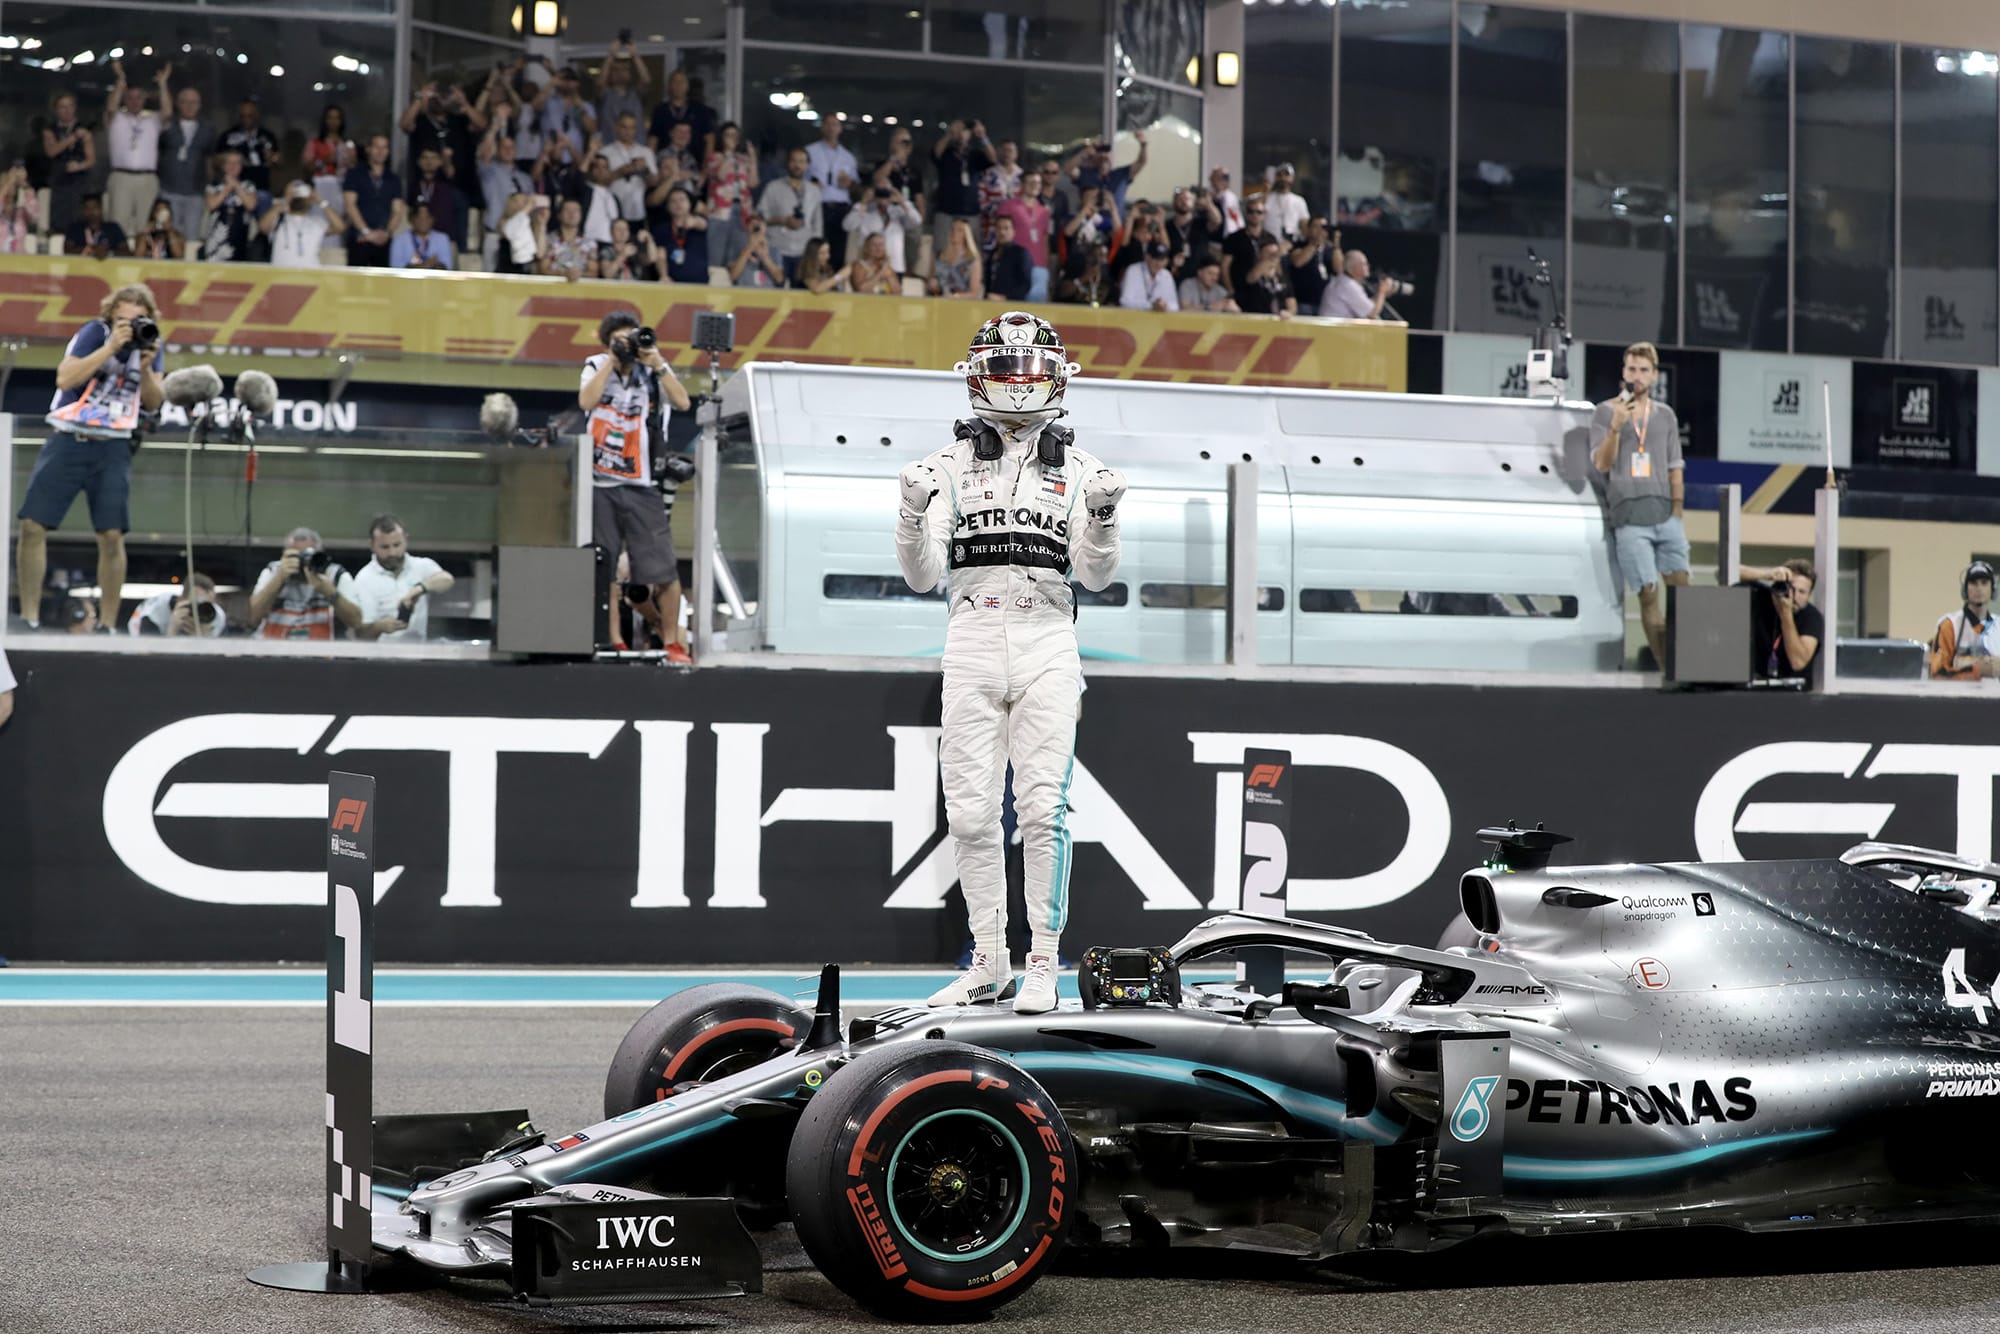 Lewis Hamilton stands on his Mercedes as he celebrates taking pole position for the 2019 Abu Dhabi Grand Prix